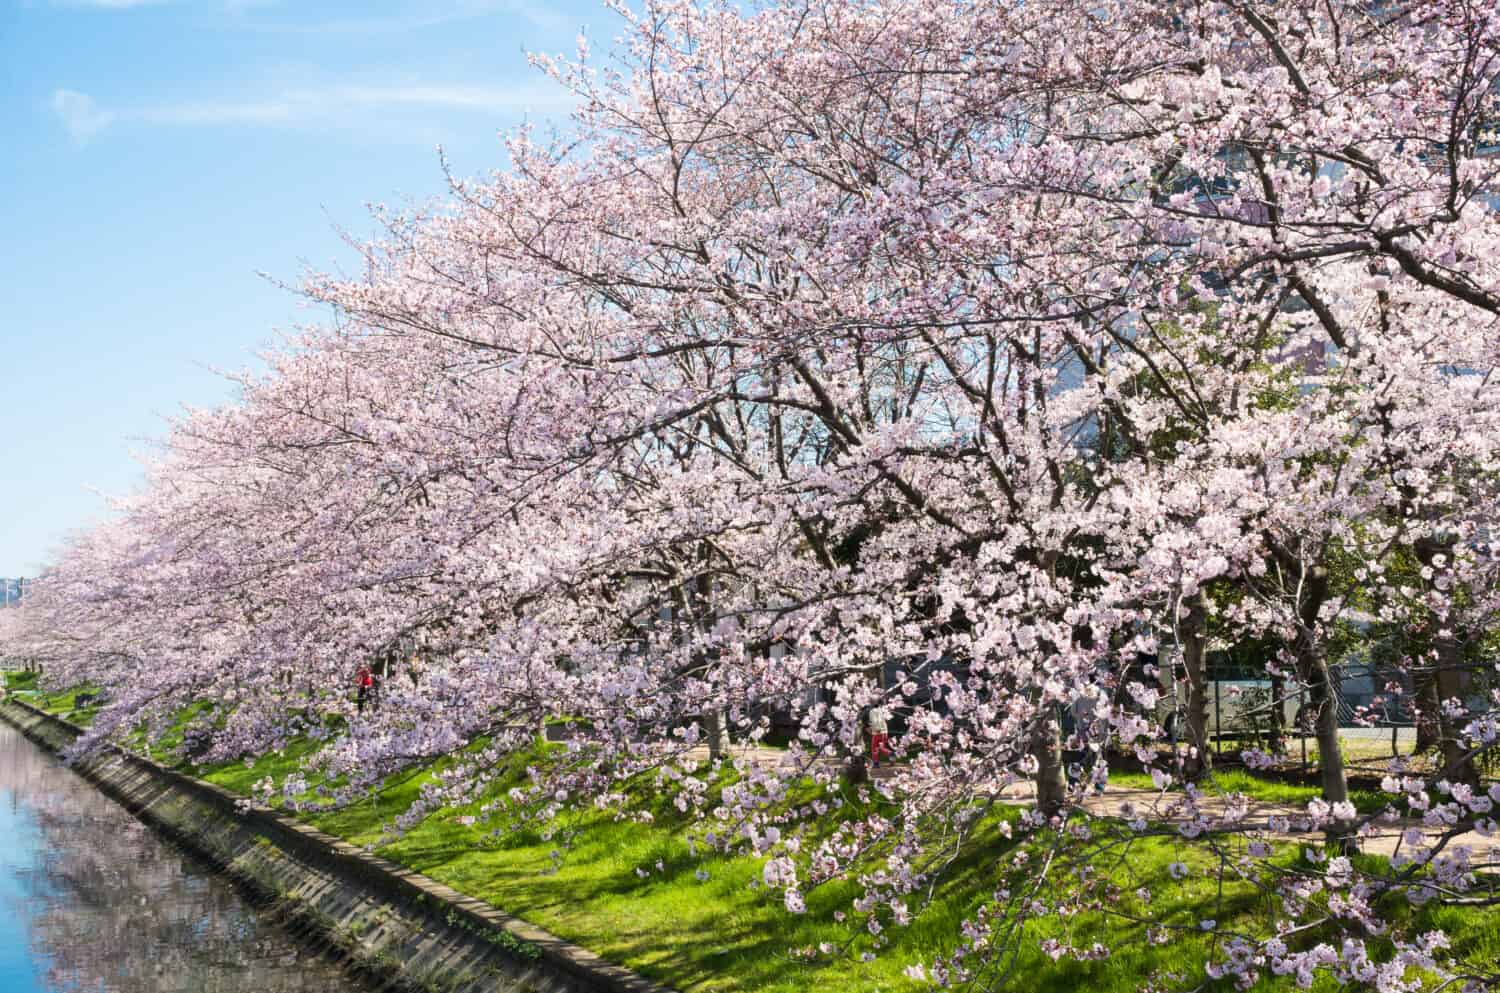 A row of cherry blossom trees along the river in full bloom